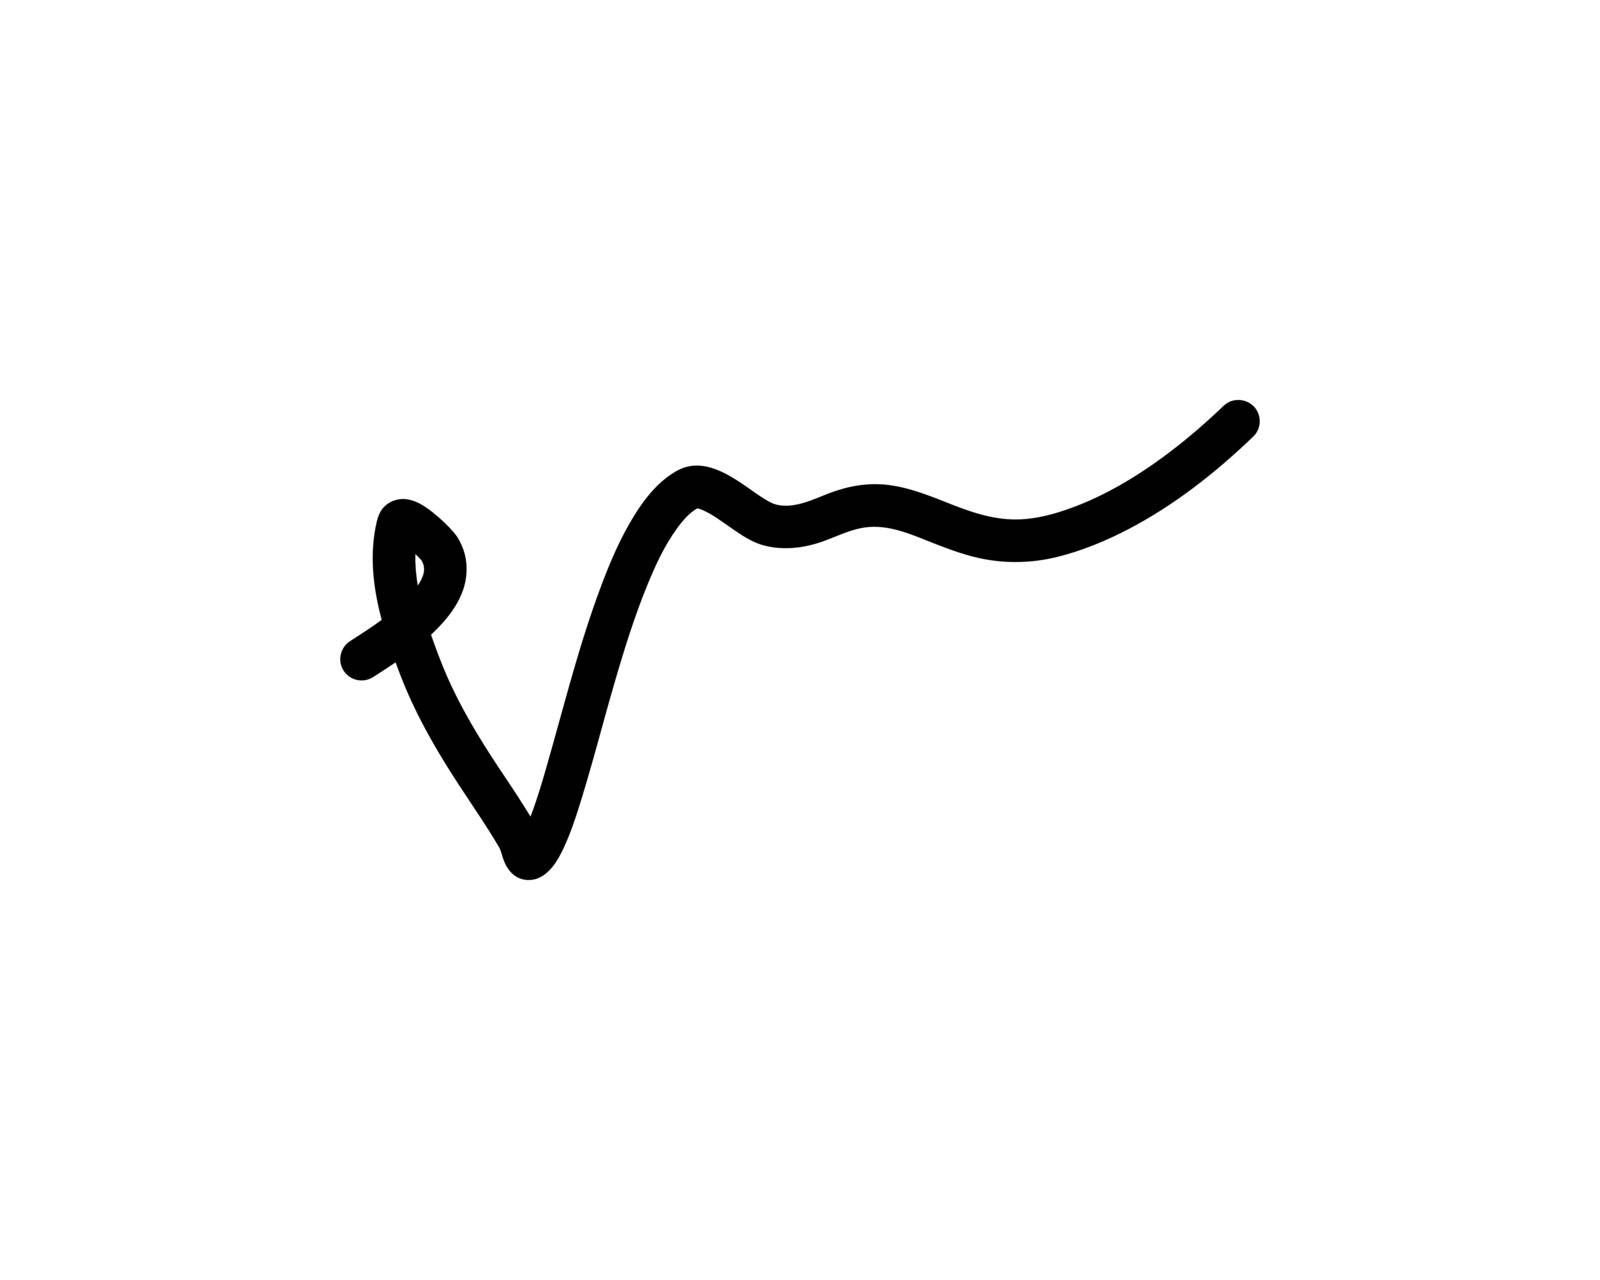 is a symbol of a signature letter